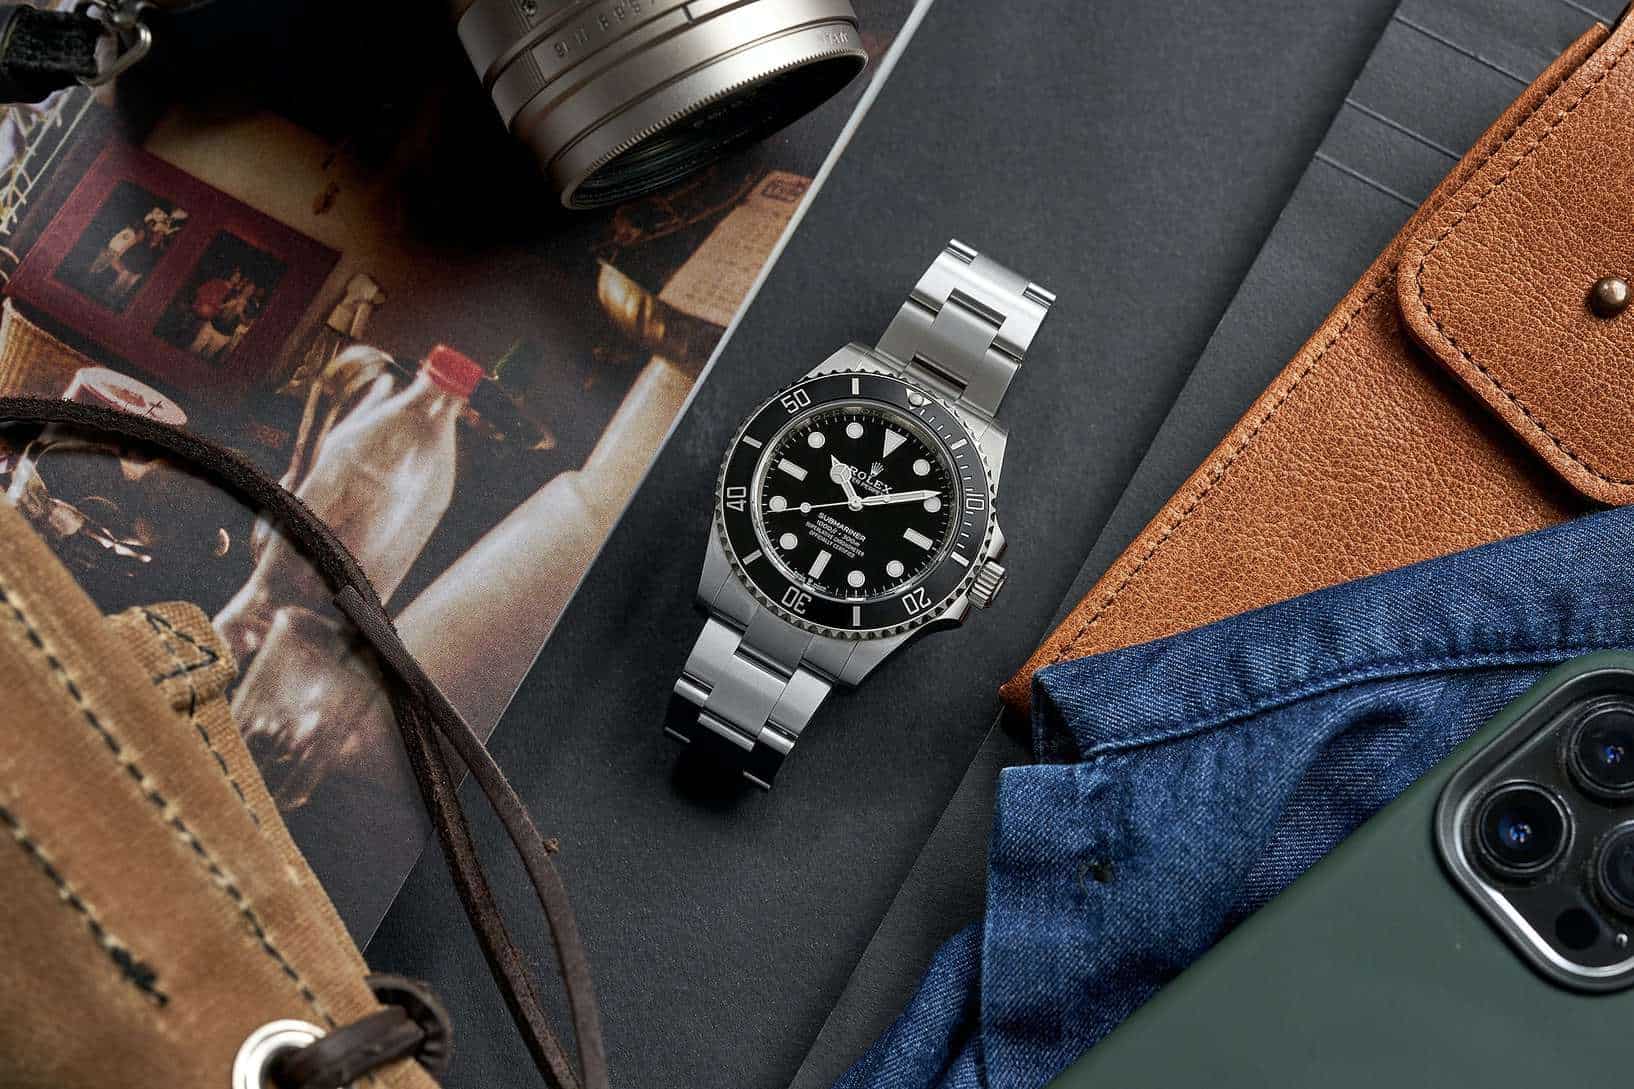 Hodinkee Pre-Owned Rolex